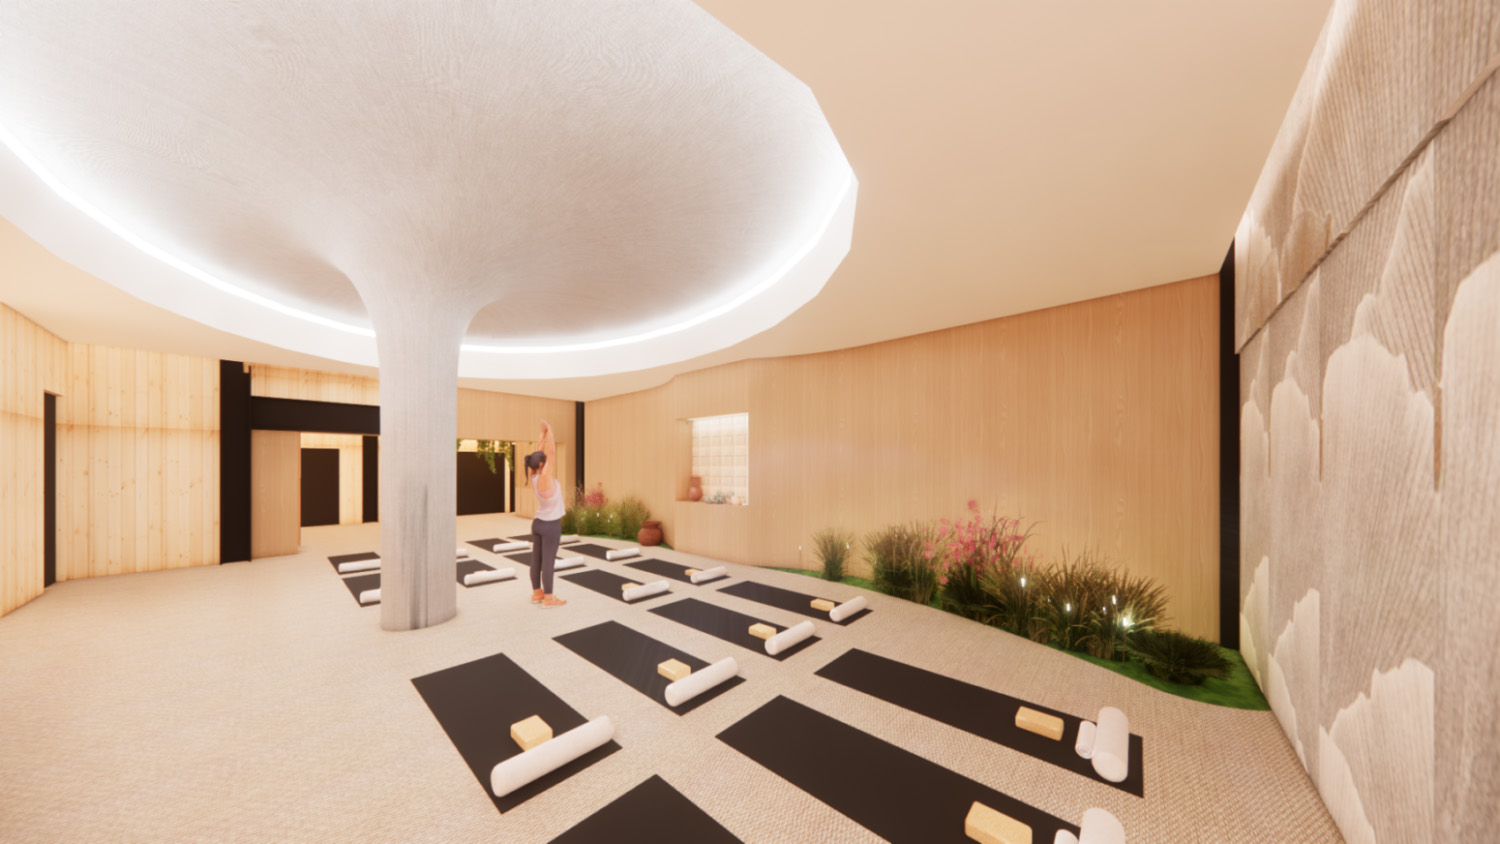 Yoga and relaxation studio, Mental Health & Wellness Interior Design, Mental Health & Wellness Centre in Vancouver British Columbia, by Cutler